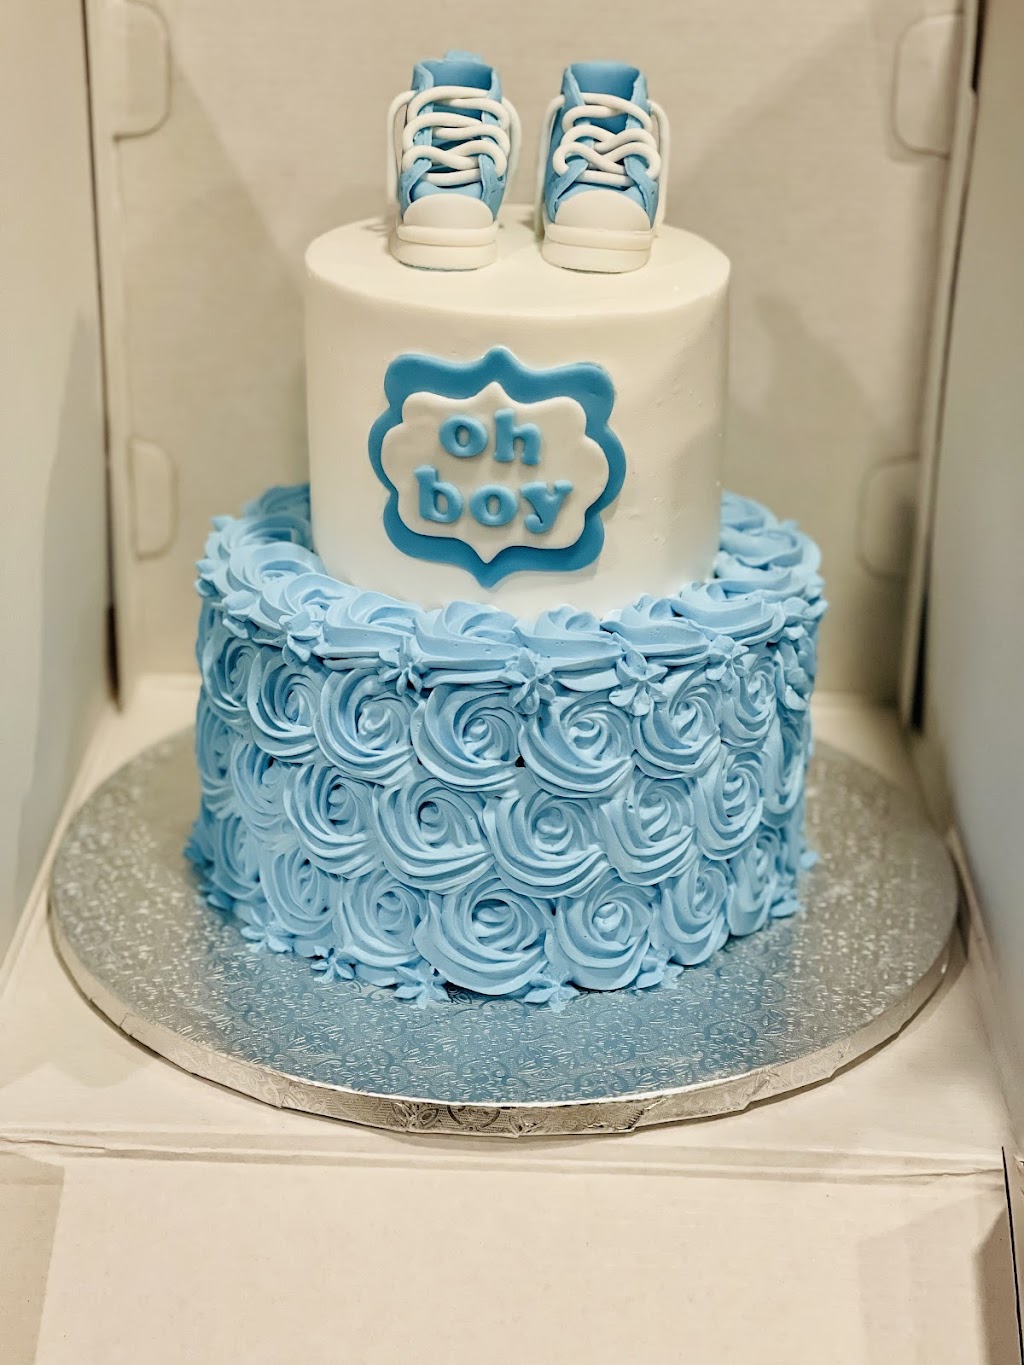 AD’s custom cakes (by appointment only) | 51 Fairway Blvd, Monroe Township, NJ 08831 | Phone: (201) 588-0213